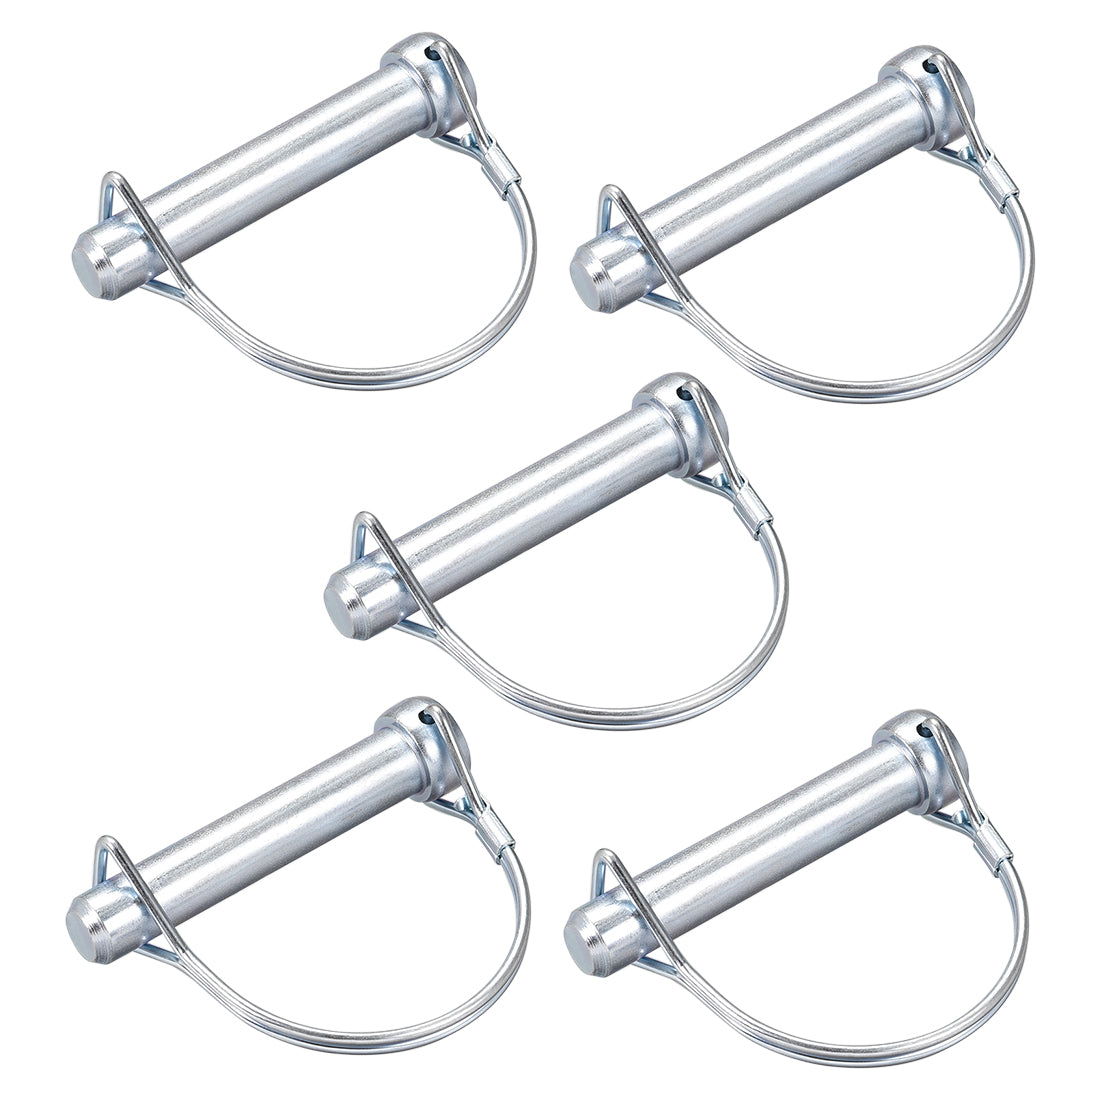 uxcell Uxcell Shaft Locking Pin 12mmx65mm Coupler Pin for Farm Trailers Lawn Arch 5Pcs